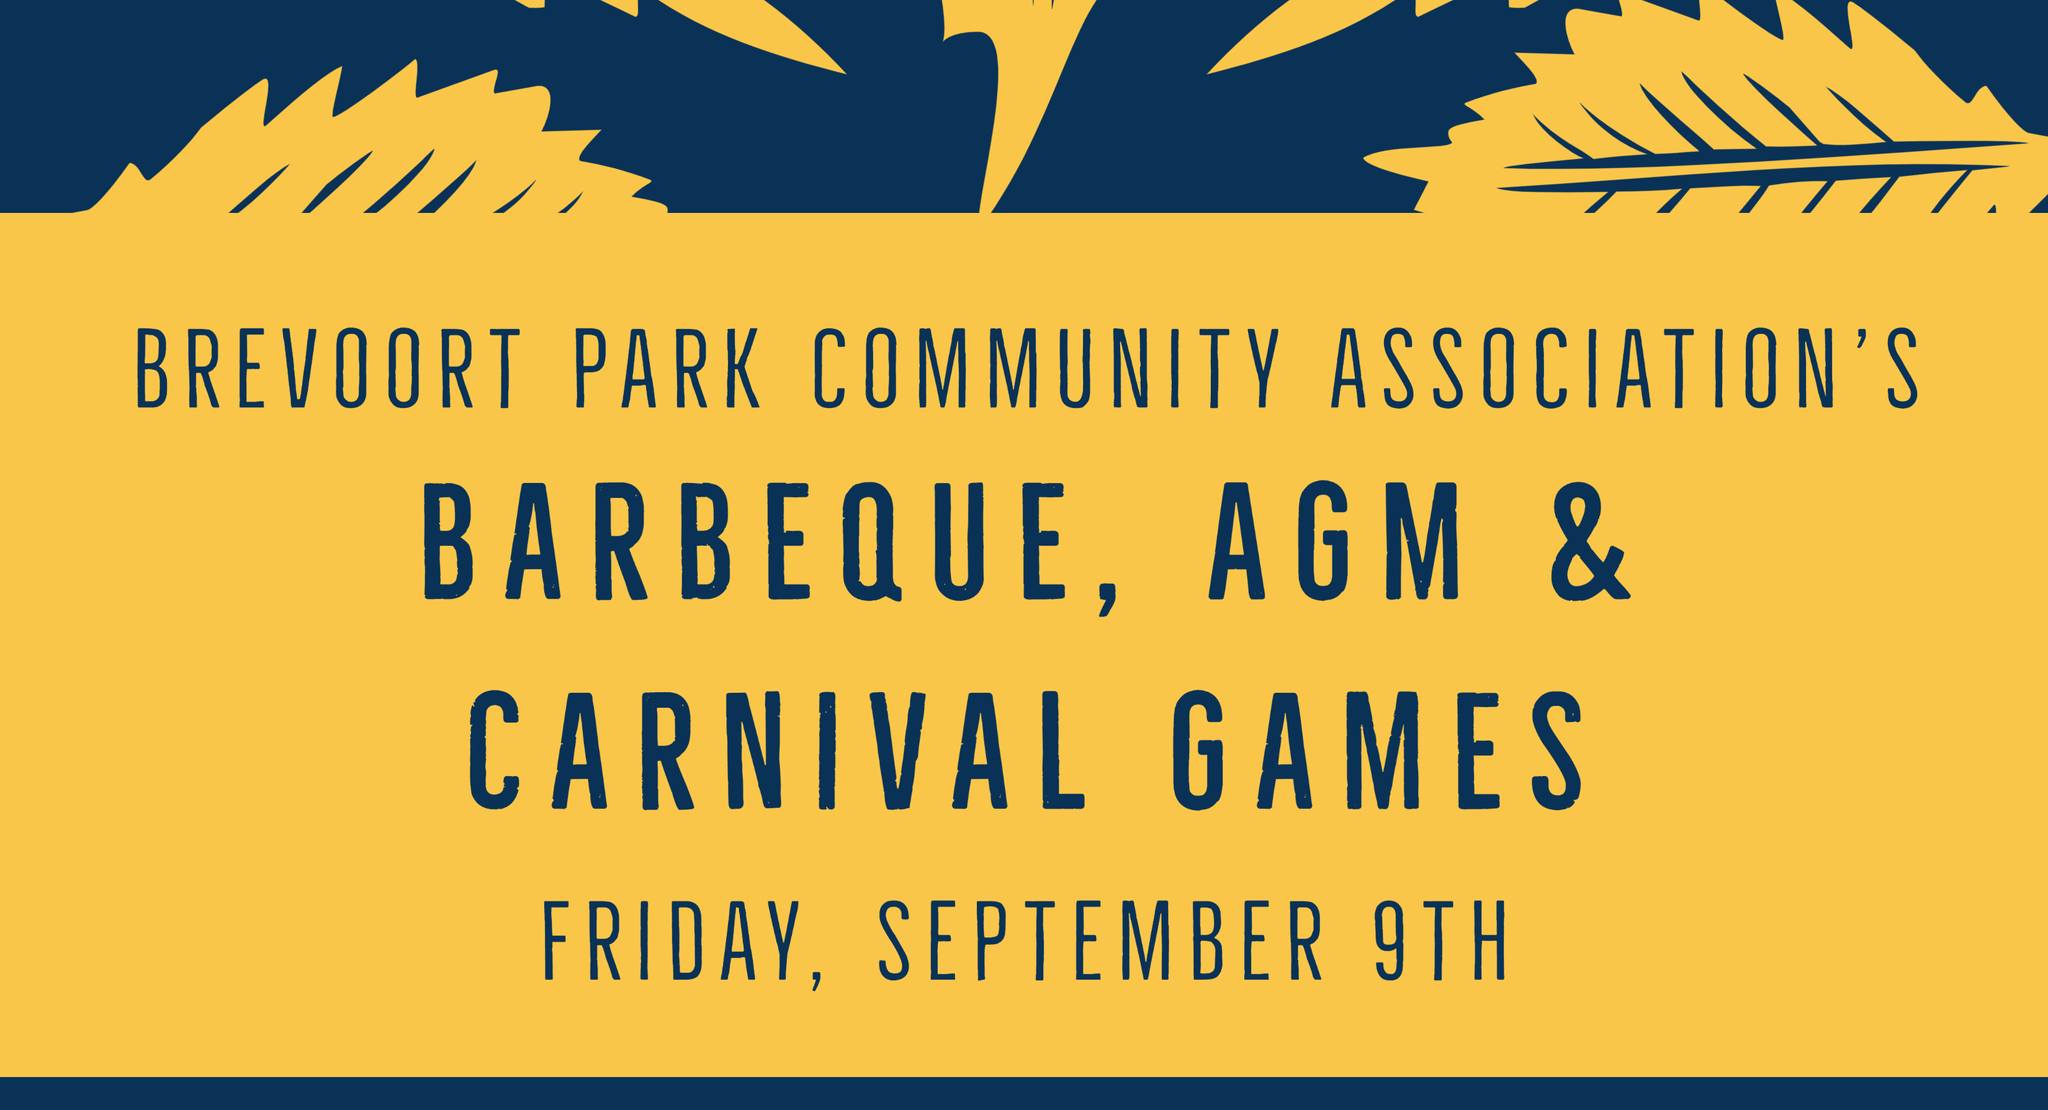 Brevoort Park Community Association's AGM with Barbeque and Carnival